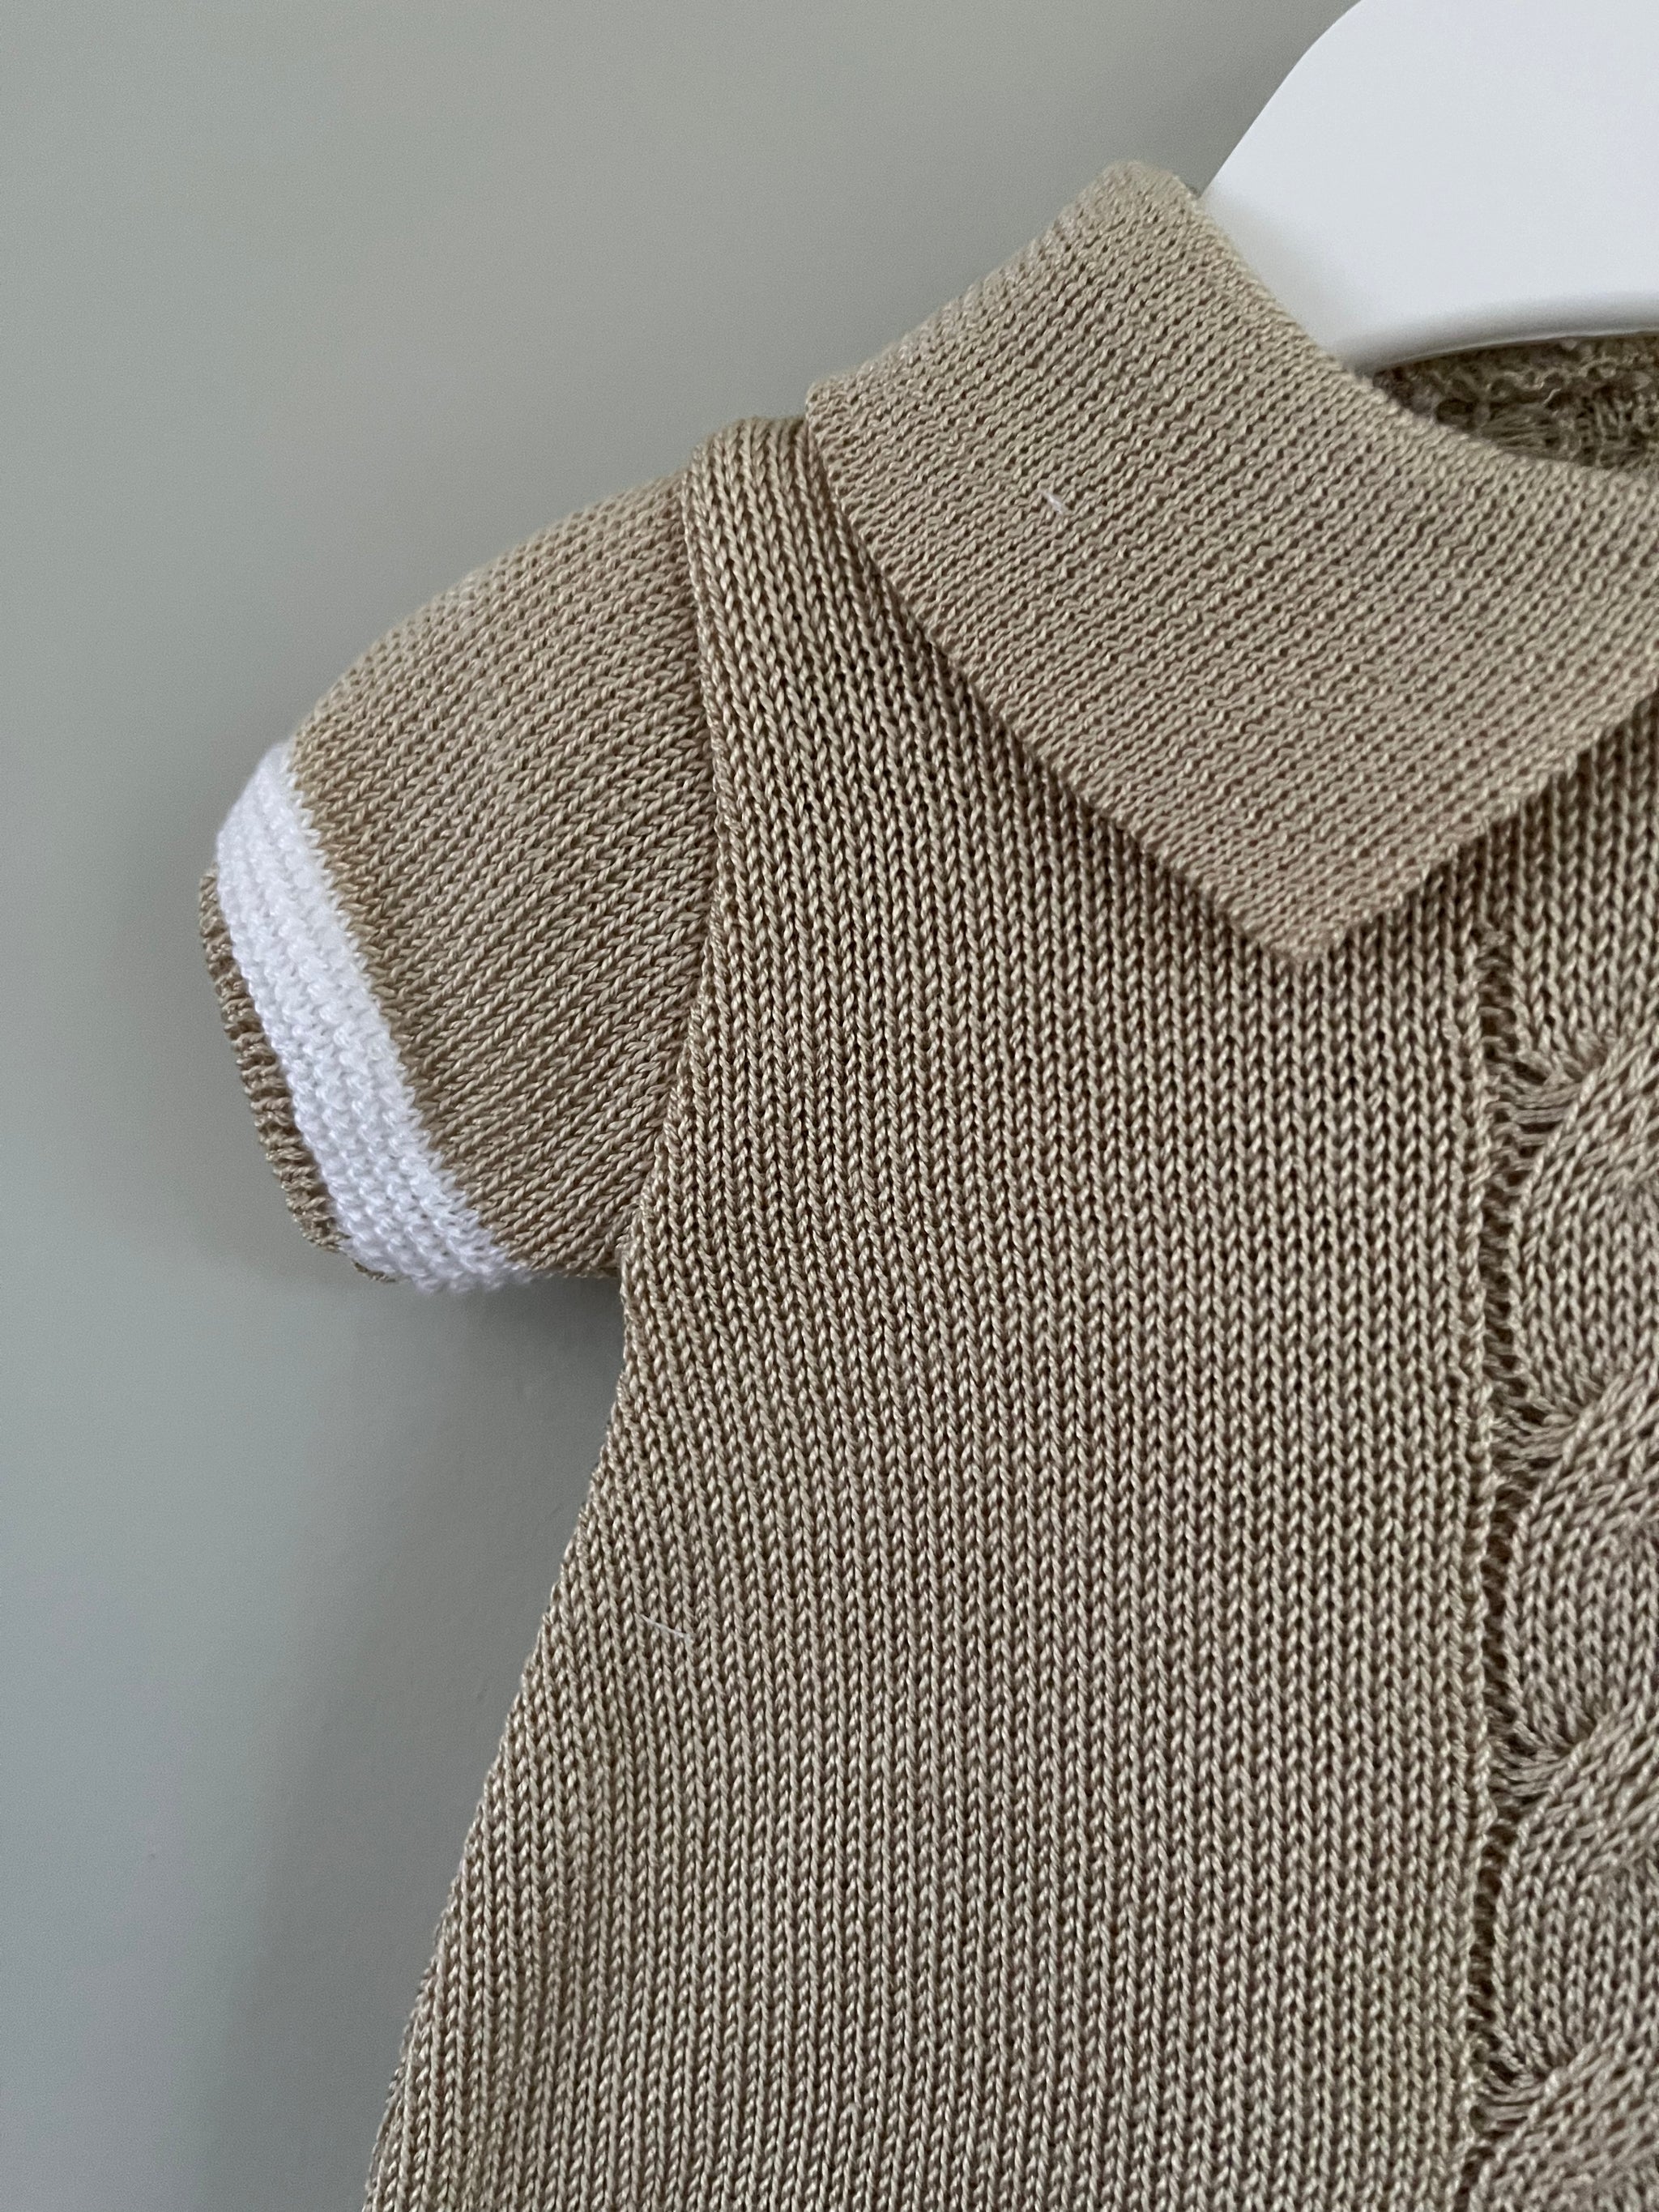 Baby Beige Knitted Romper Outfit Little Nosh